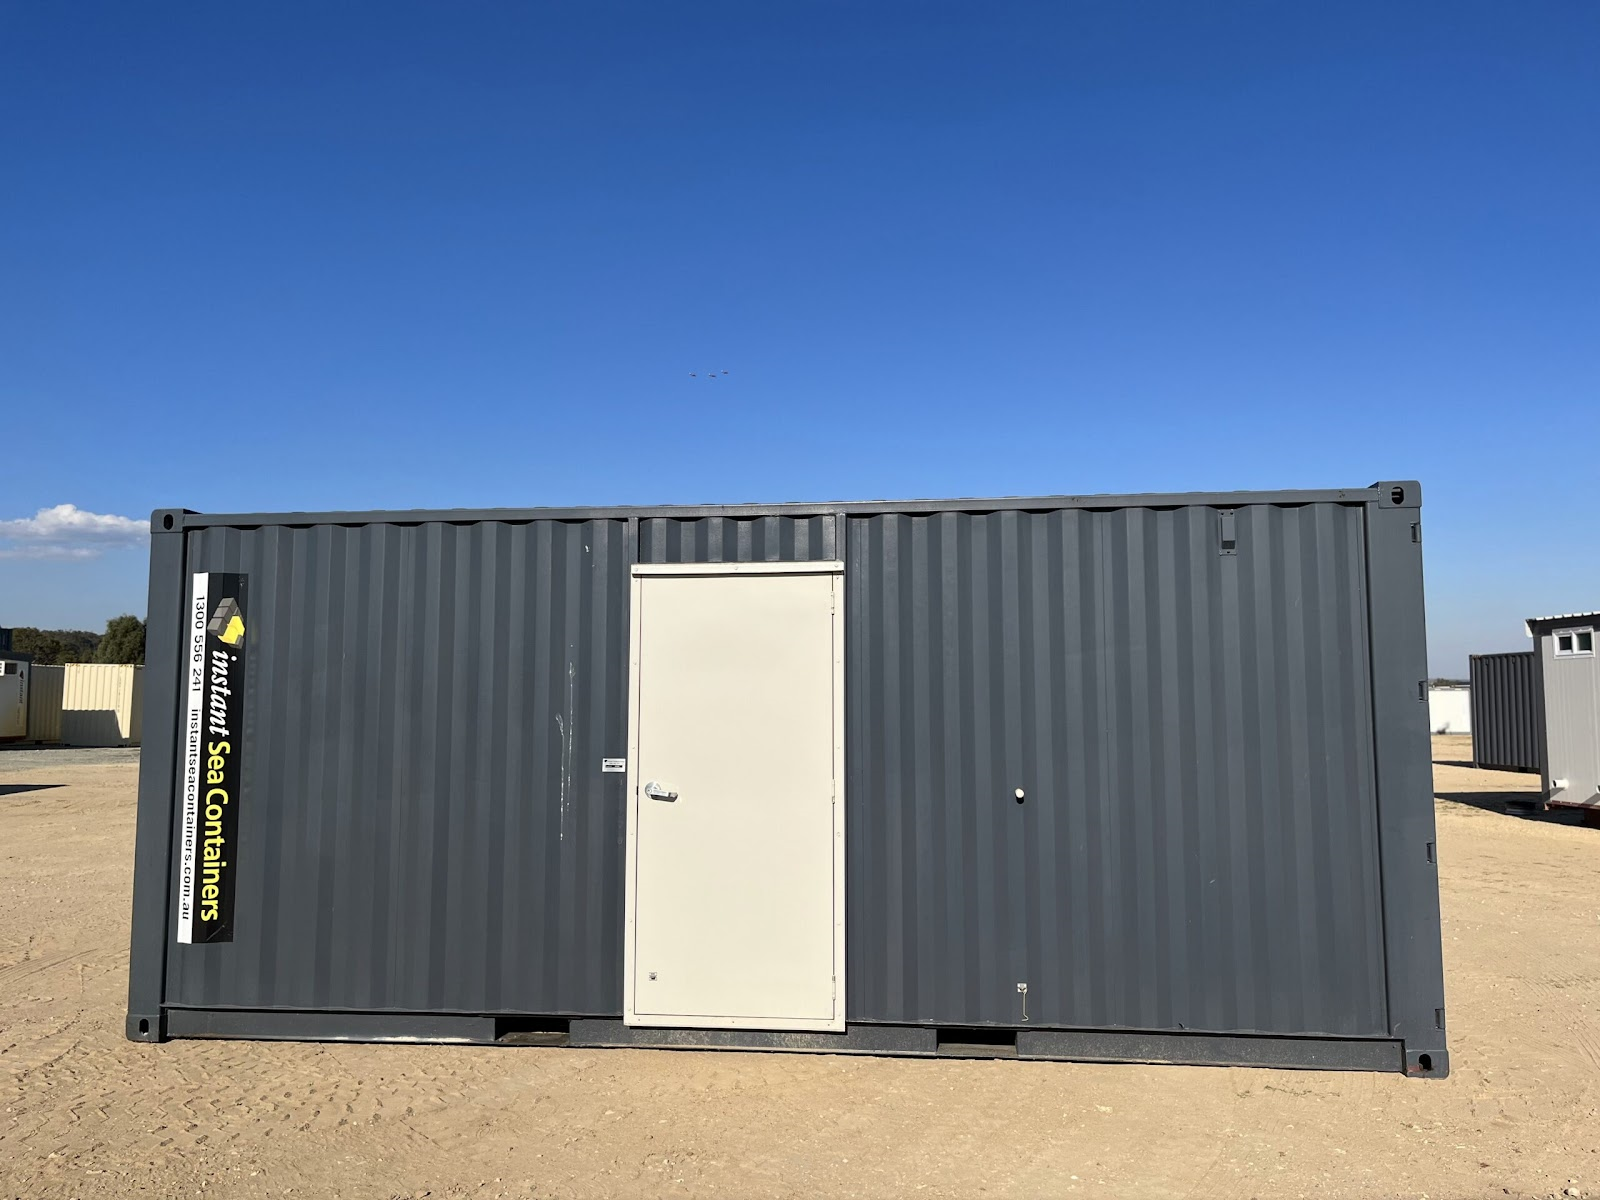 a standard gray shipping container fitted with a white door, placed in an open storage or construction area.